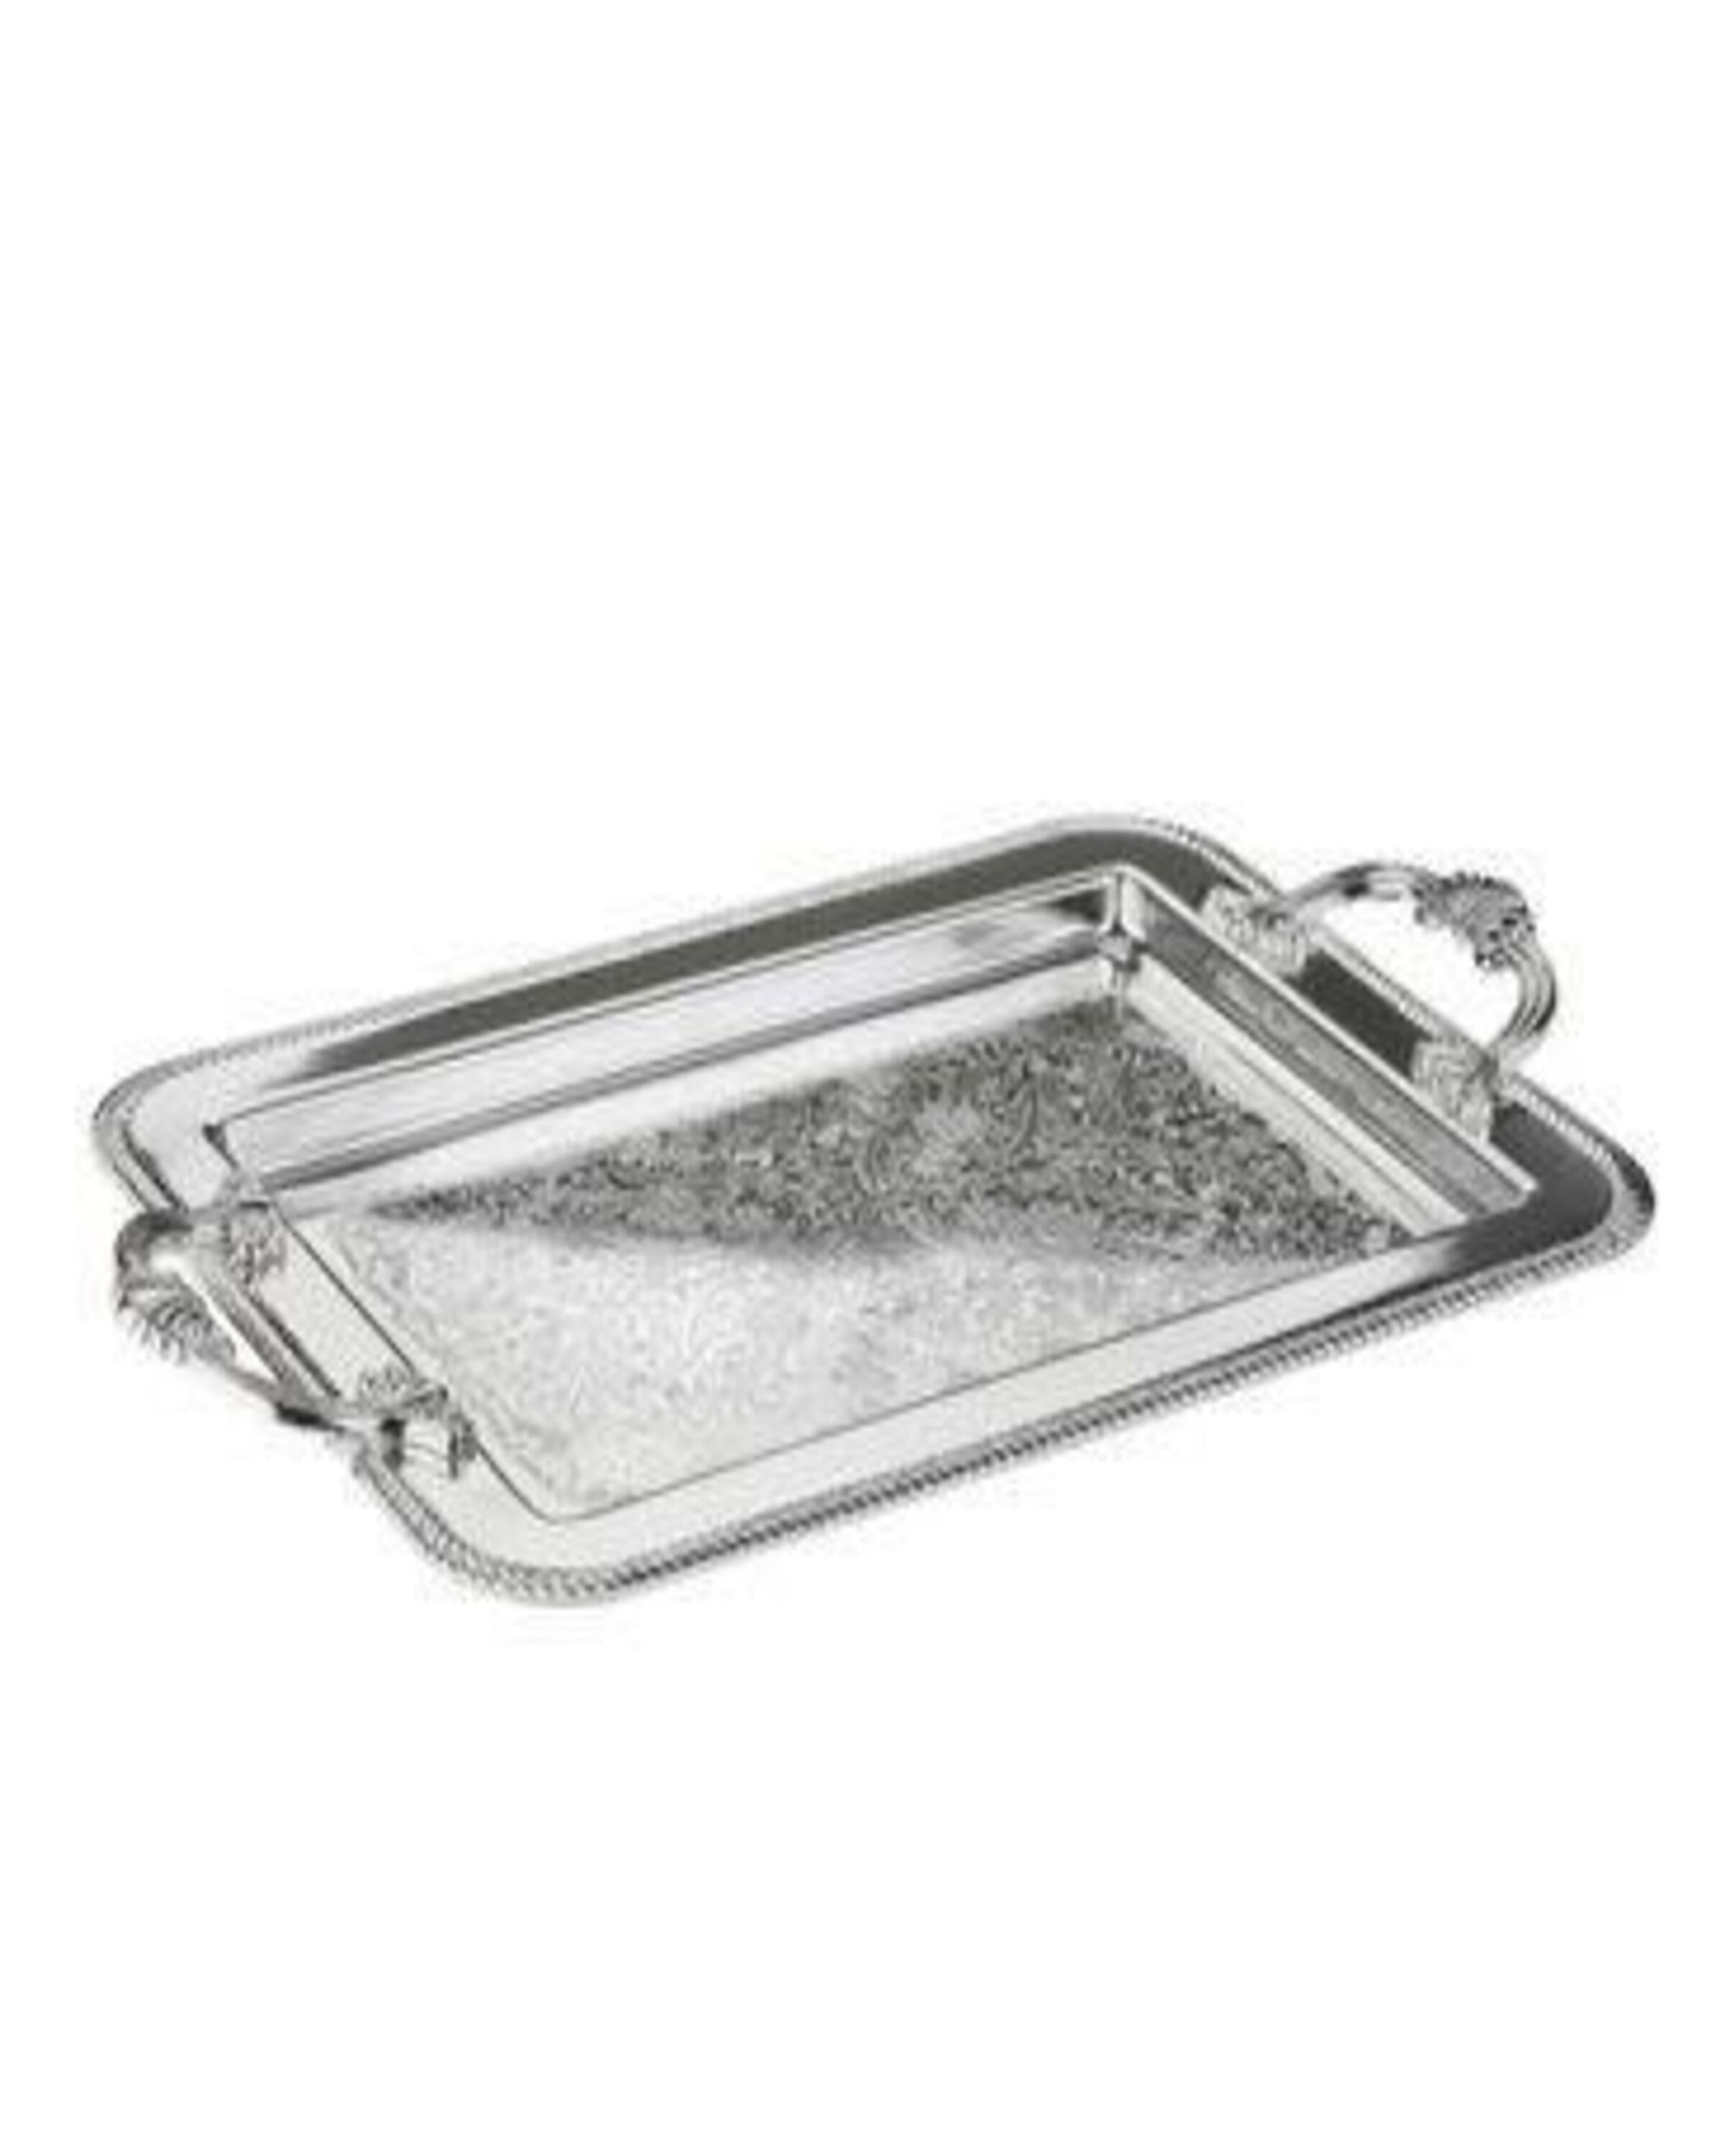 Luxury Classic Silver Plated Tray